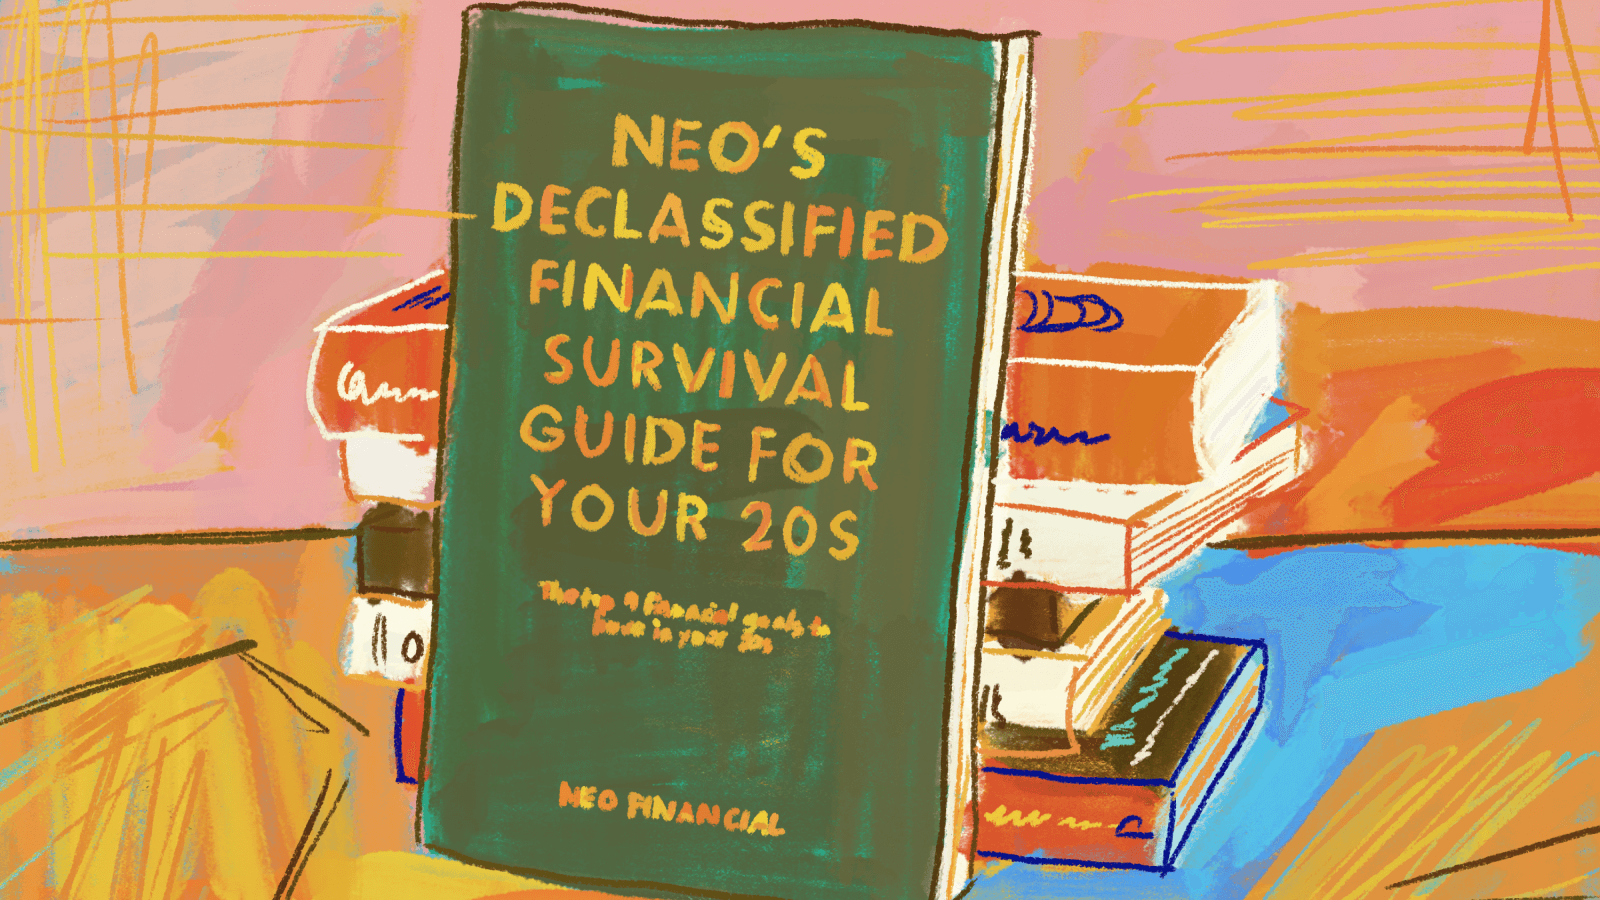 Find answers to your top questions about personal finance in your 20s. We focus on the top 9 goals you should aim for to set yourself up for success